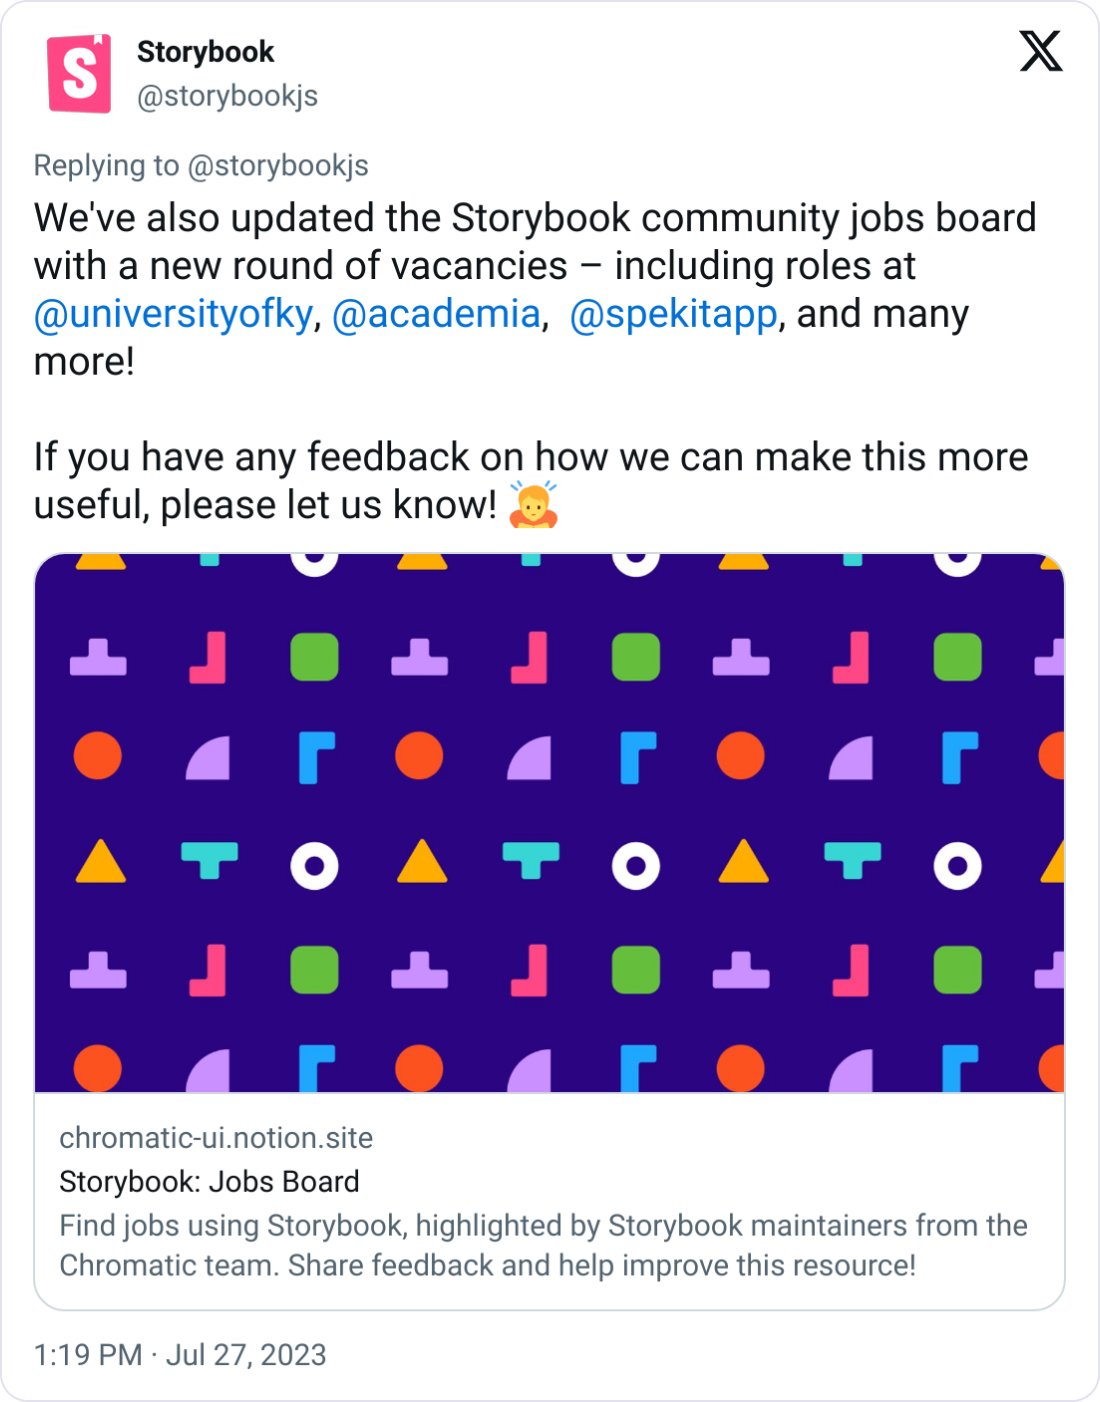 Storybook @storybookjs We've also updated the Storybook community jobs board with a new round of vacancies – including roles at  @universityofky ,  @academia ,   @spekitapp , and many more!   If you have any feedback on how we can make this more useful, please let us know! 🙇